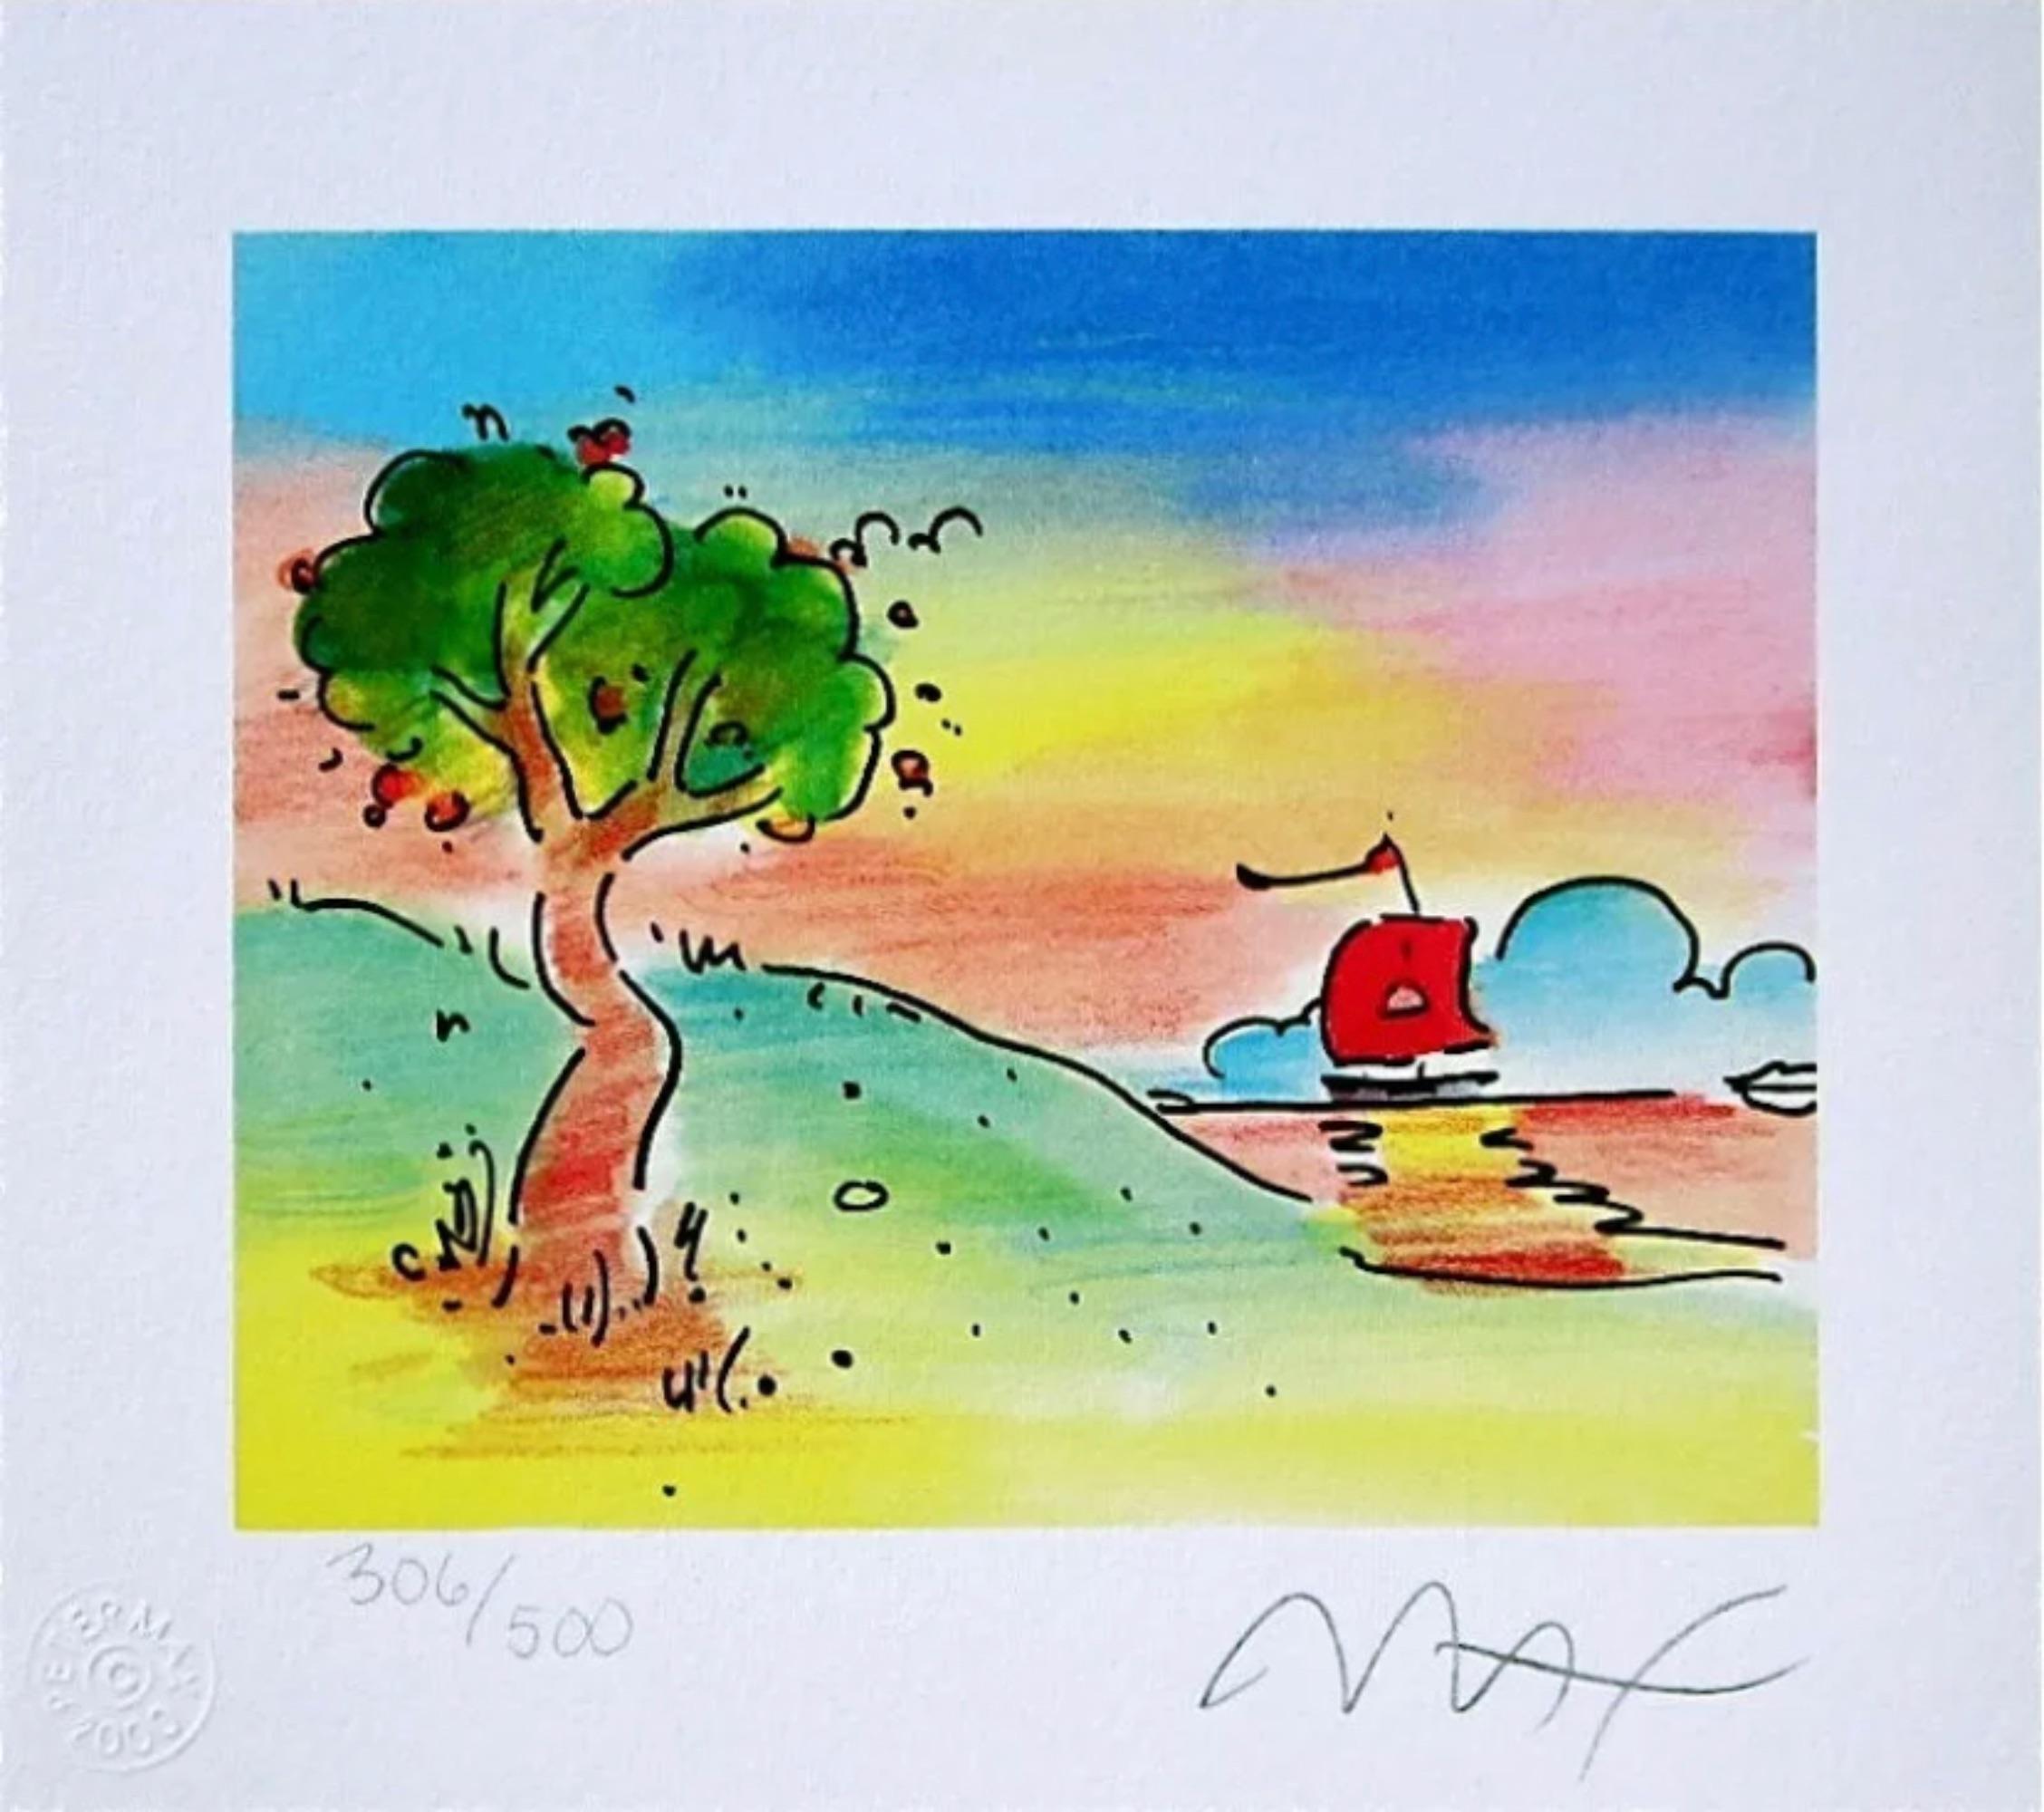 Artist: Peter Max (1937)
Title: Quiet Lake
Year: 2000
Edition: 500, plus proofs
Medium: Lithograph on Lustro Saxony paper
Size: 7.25 x 8.5 inches
Condition: Excellent
Inscription: Signed and numbered by the artist.
Notes: Published by Via